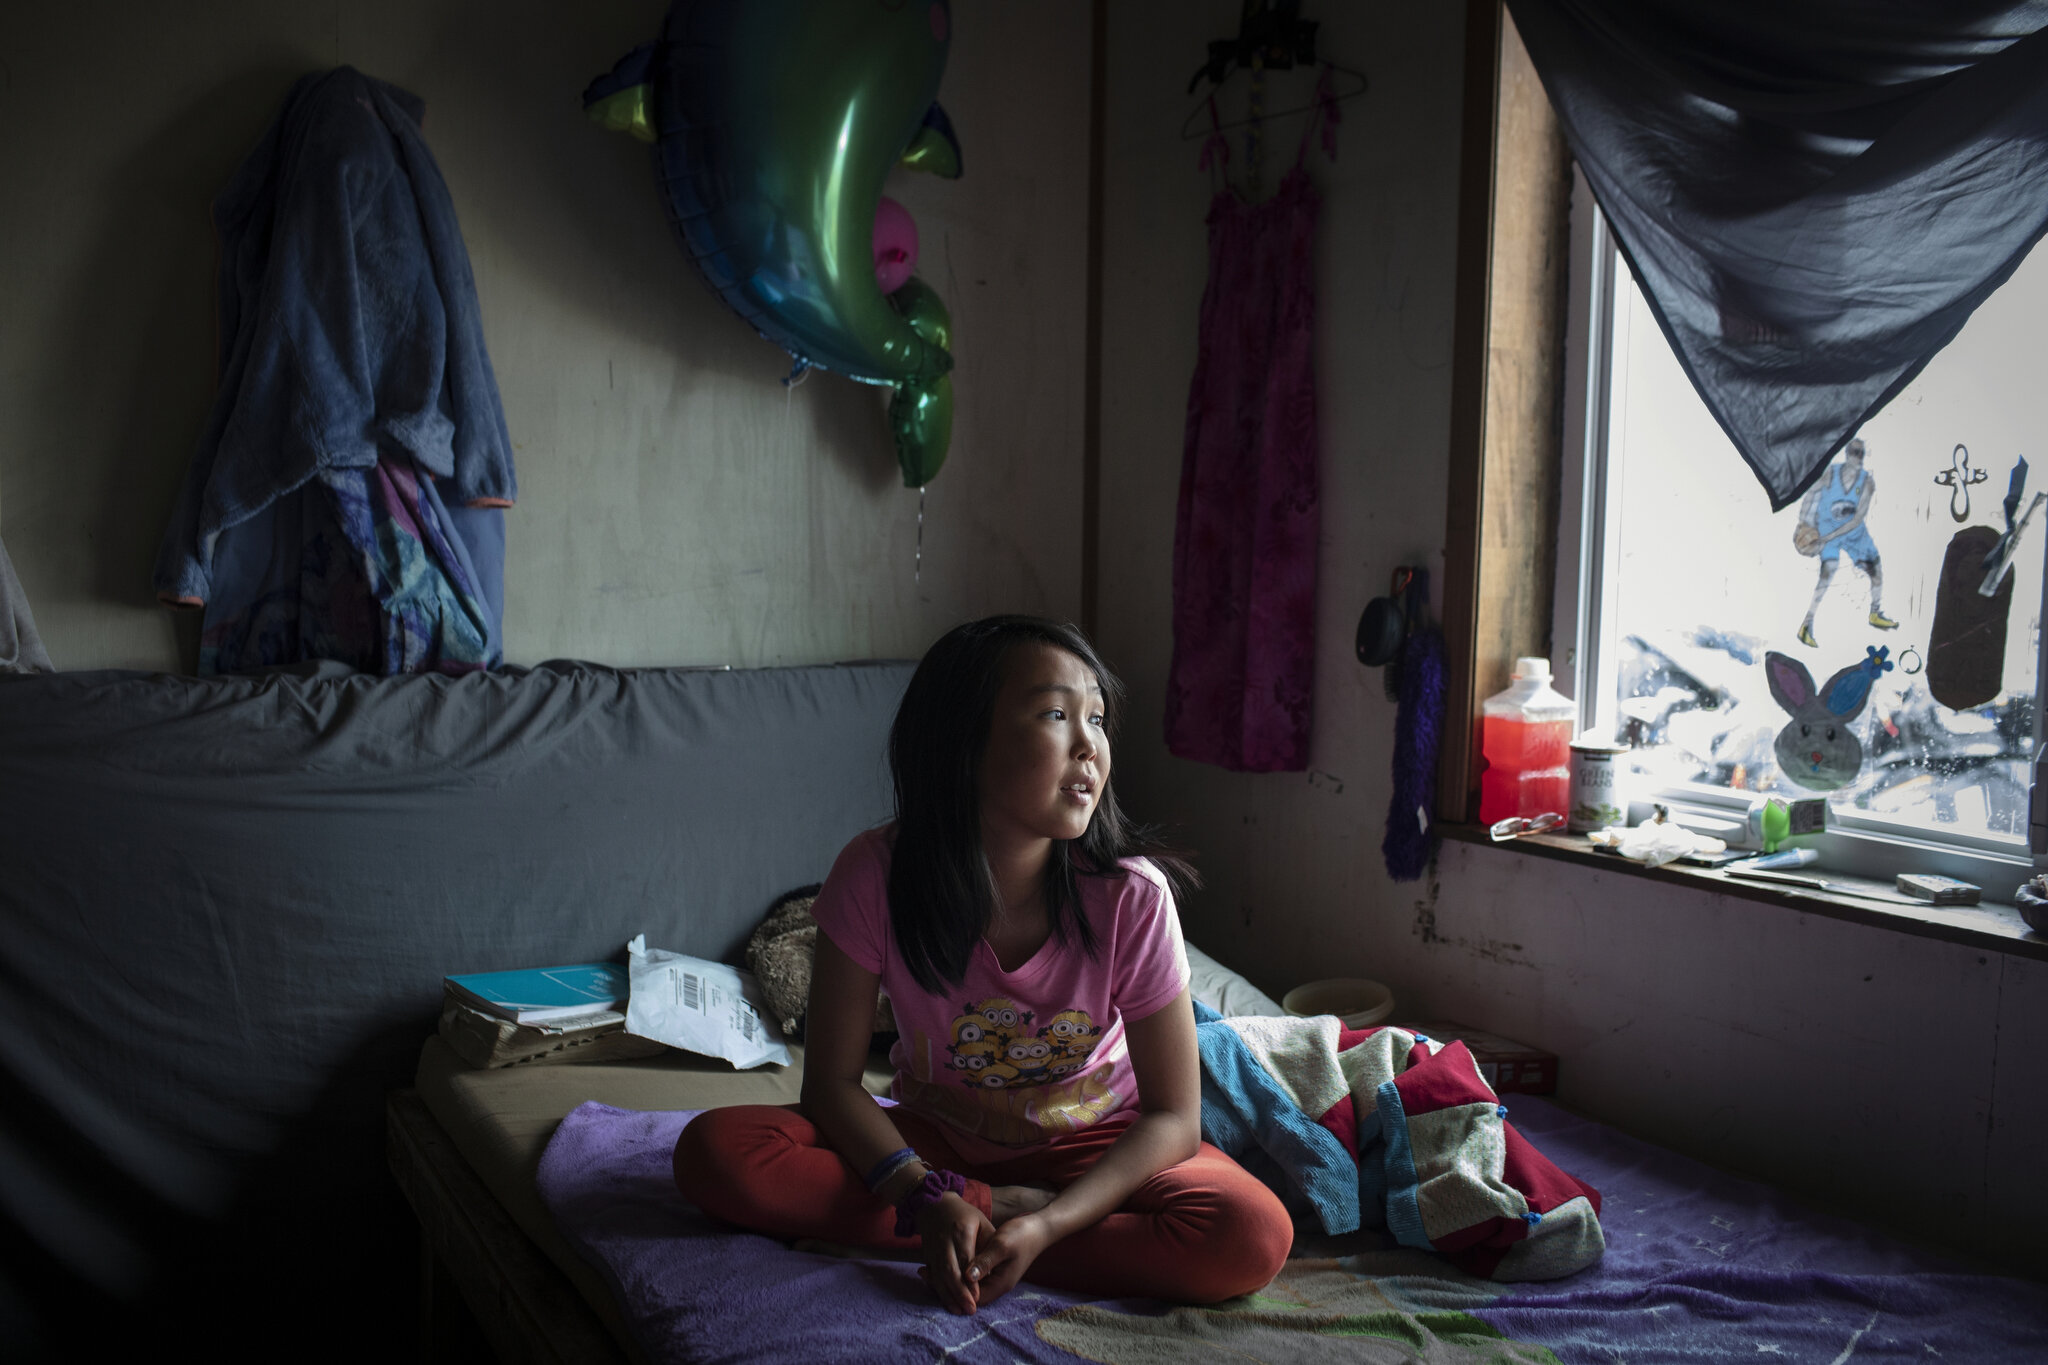  Jasmine Kassaiuli in her bedroom in Newtok, Alaska. Her ceiling recently split in two as a result of thawing permafrost underneath the ground destroying the house's foundation. May 27th, 2019. The Yupik village of Newtok, Alaska, population 380, is 